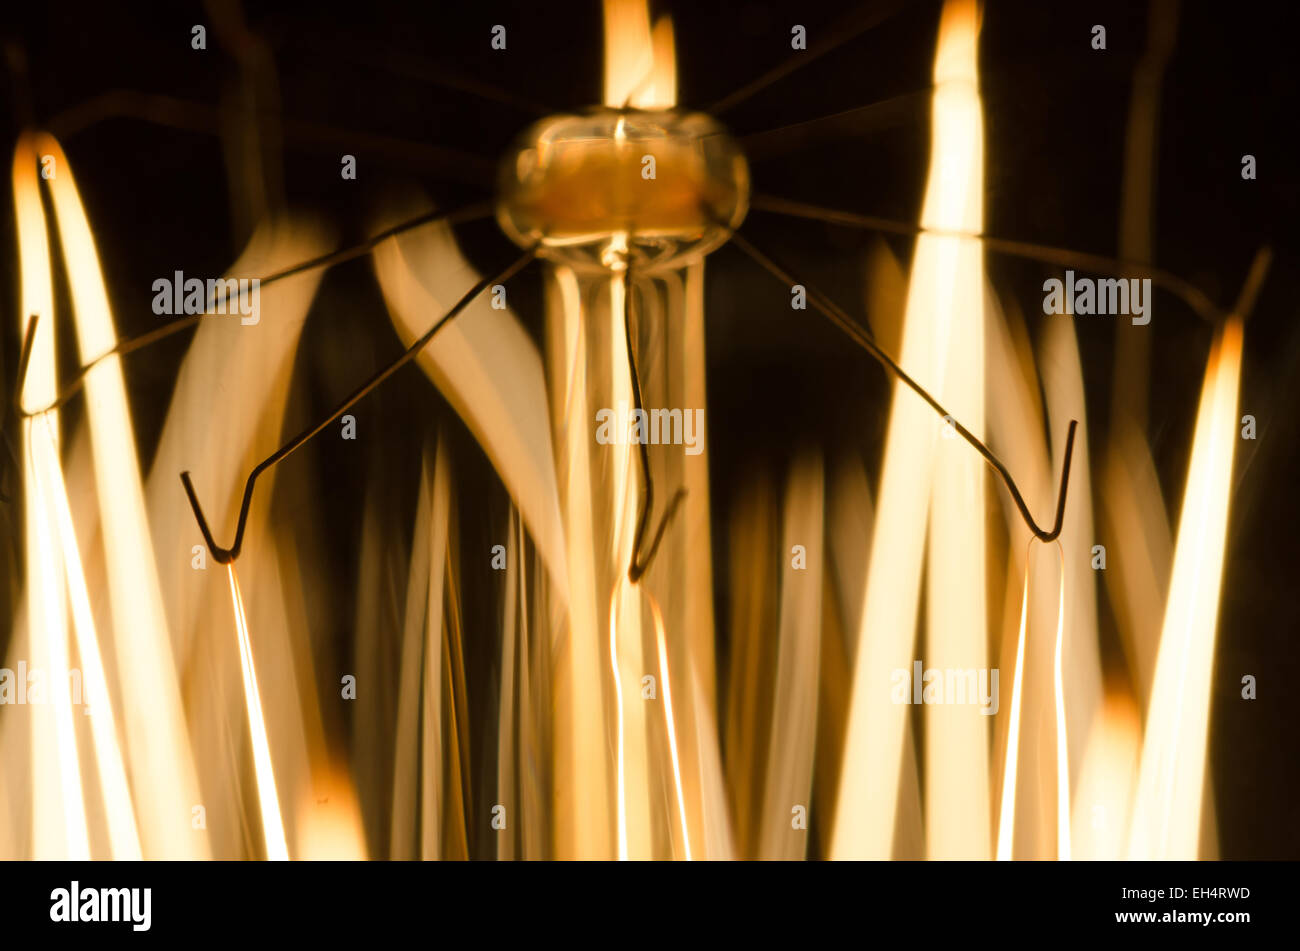 A close-up of a light bulb on a black background Stock Photo